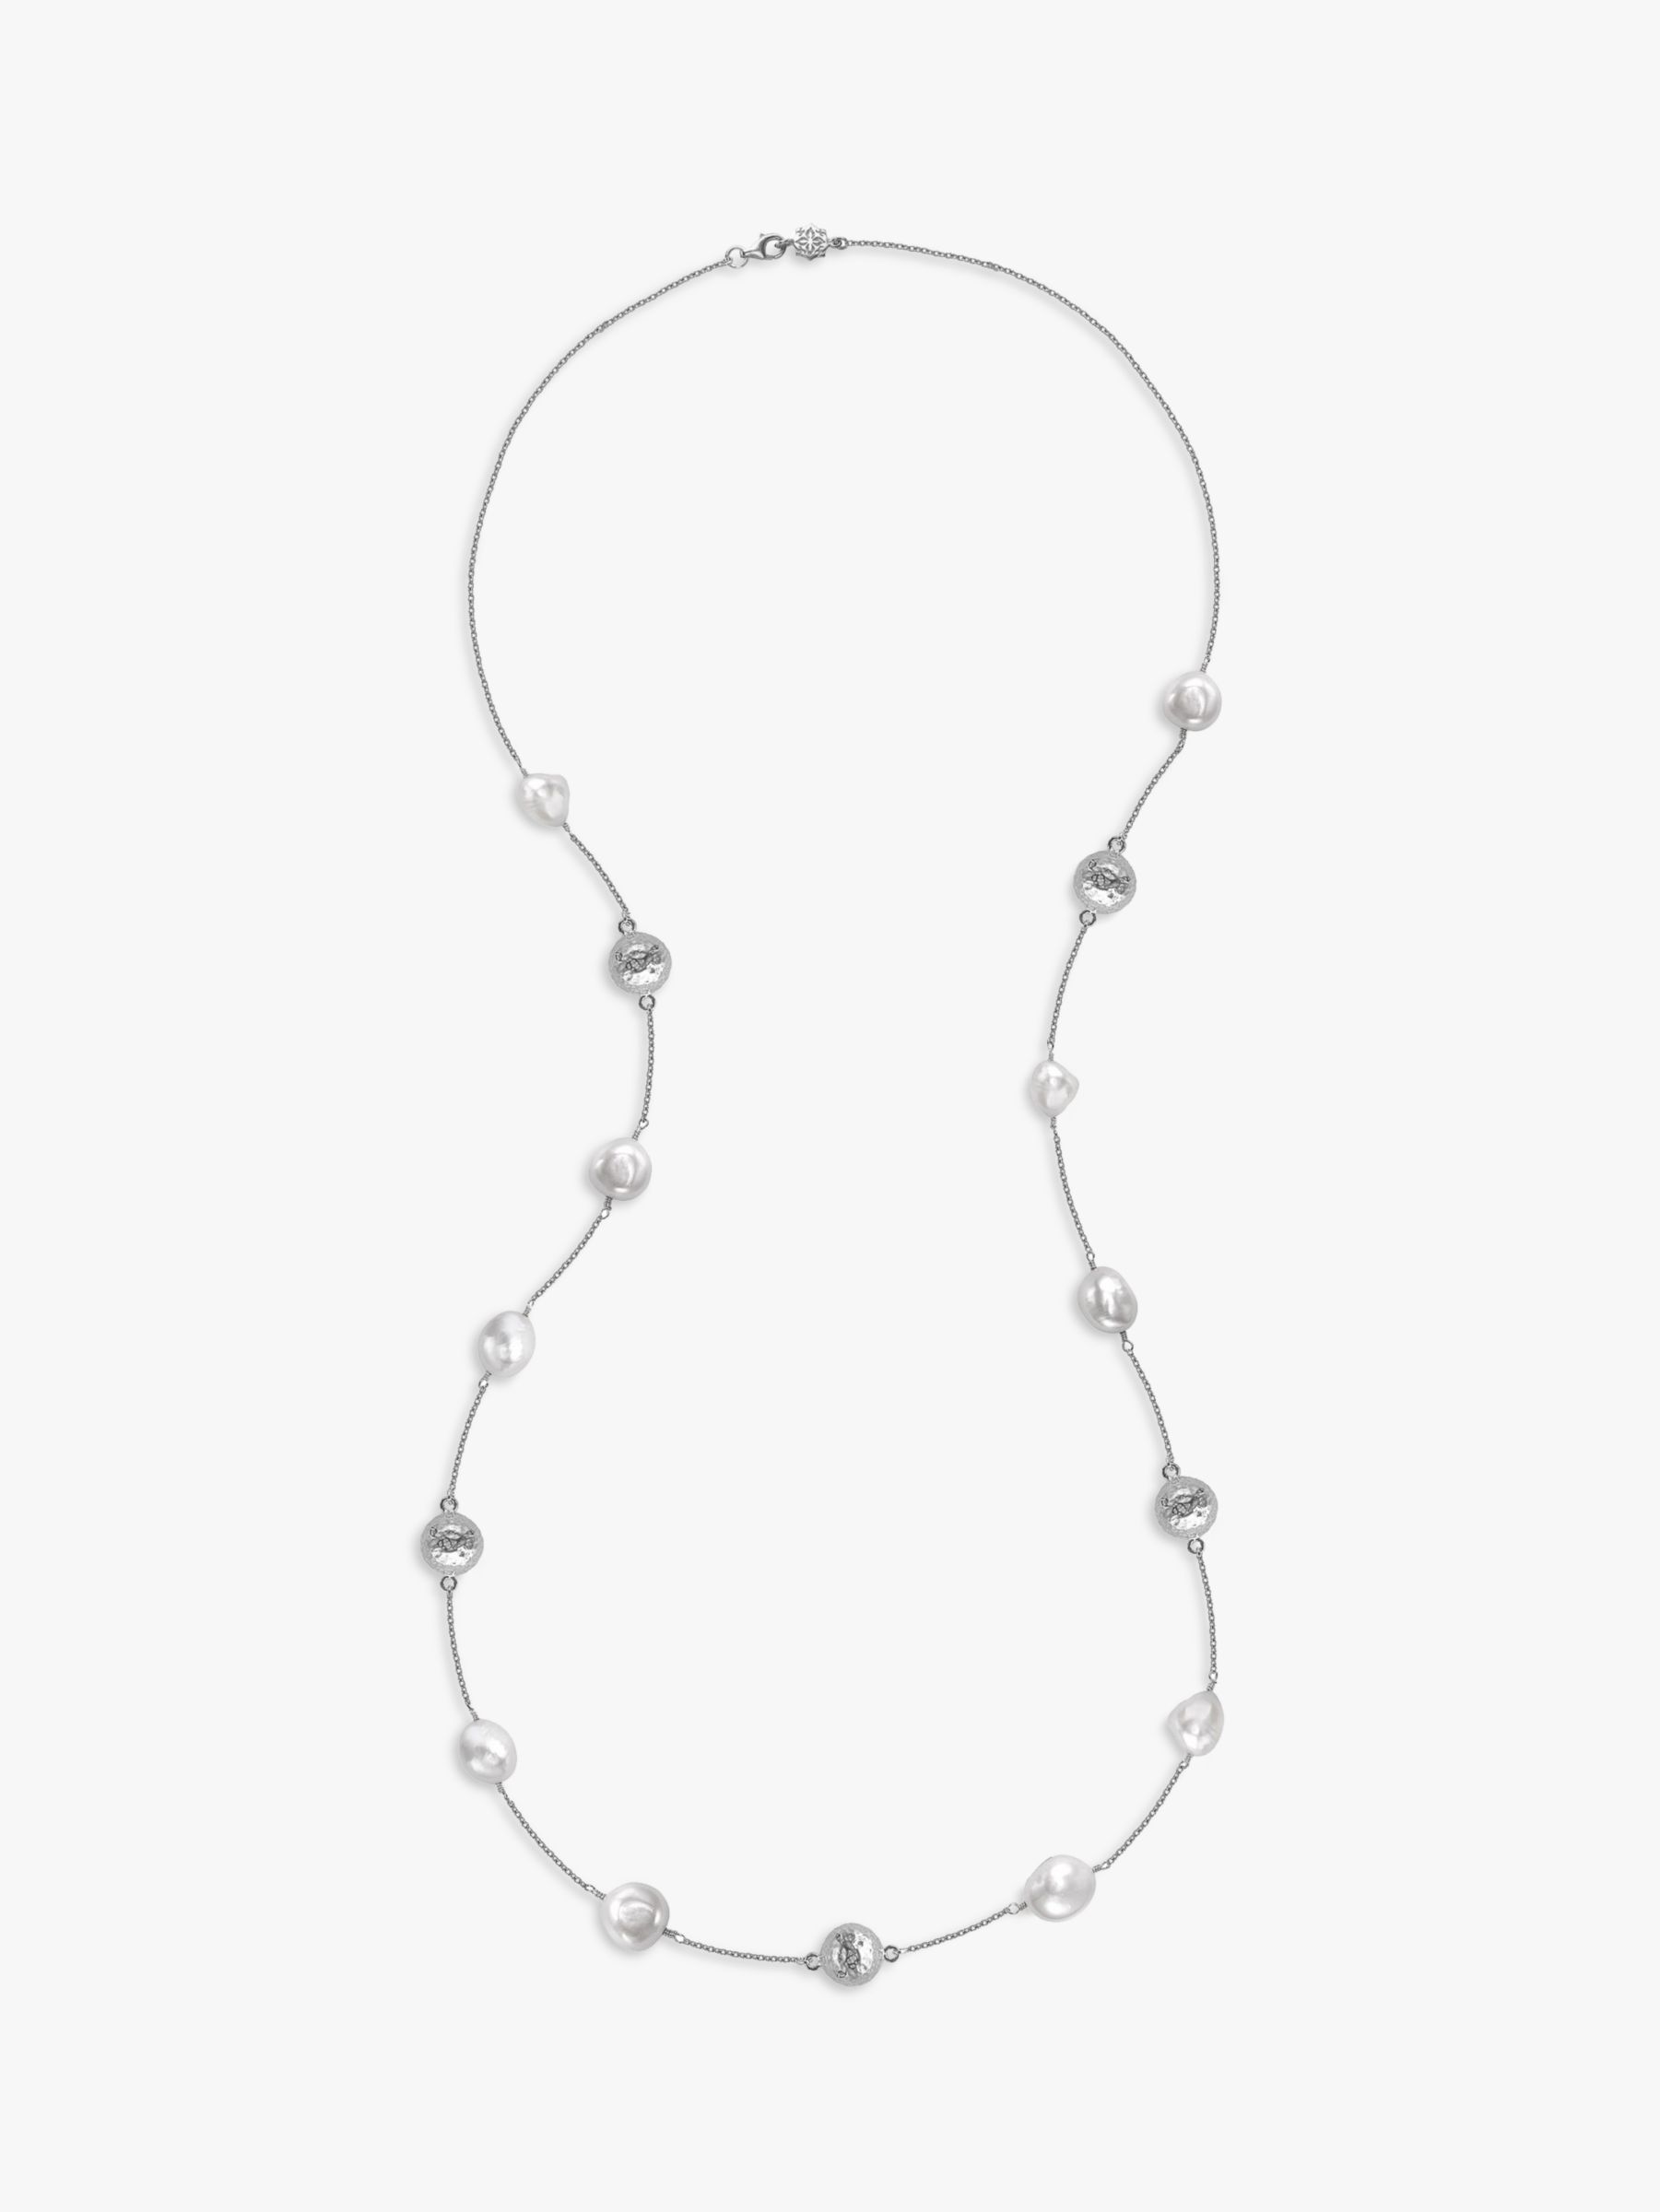 Dower & Hall Baroque Pearl Disc Long Chain Necklace, Silver/White